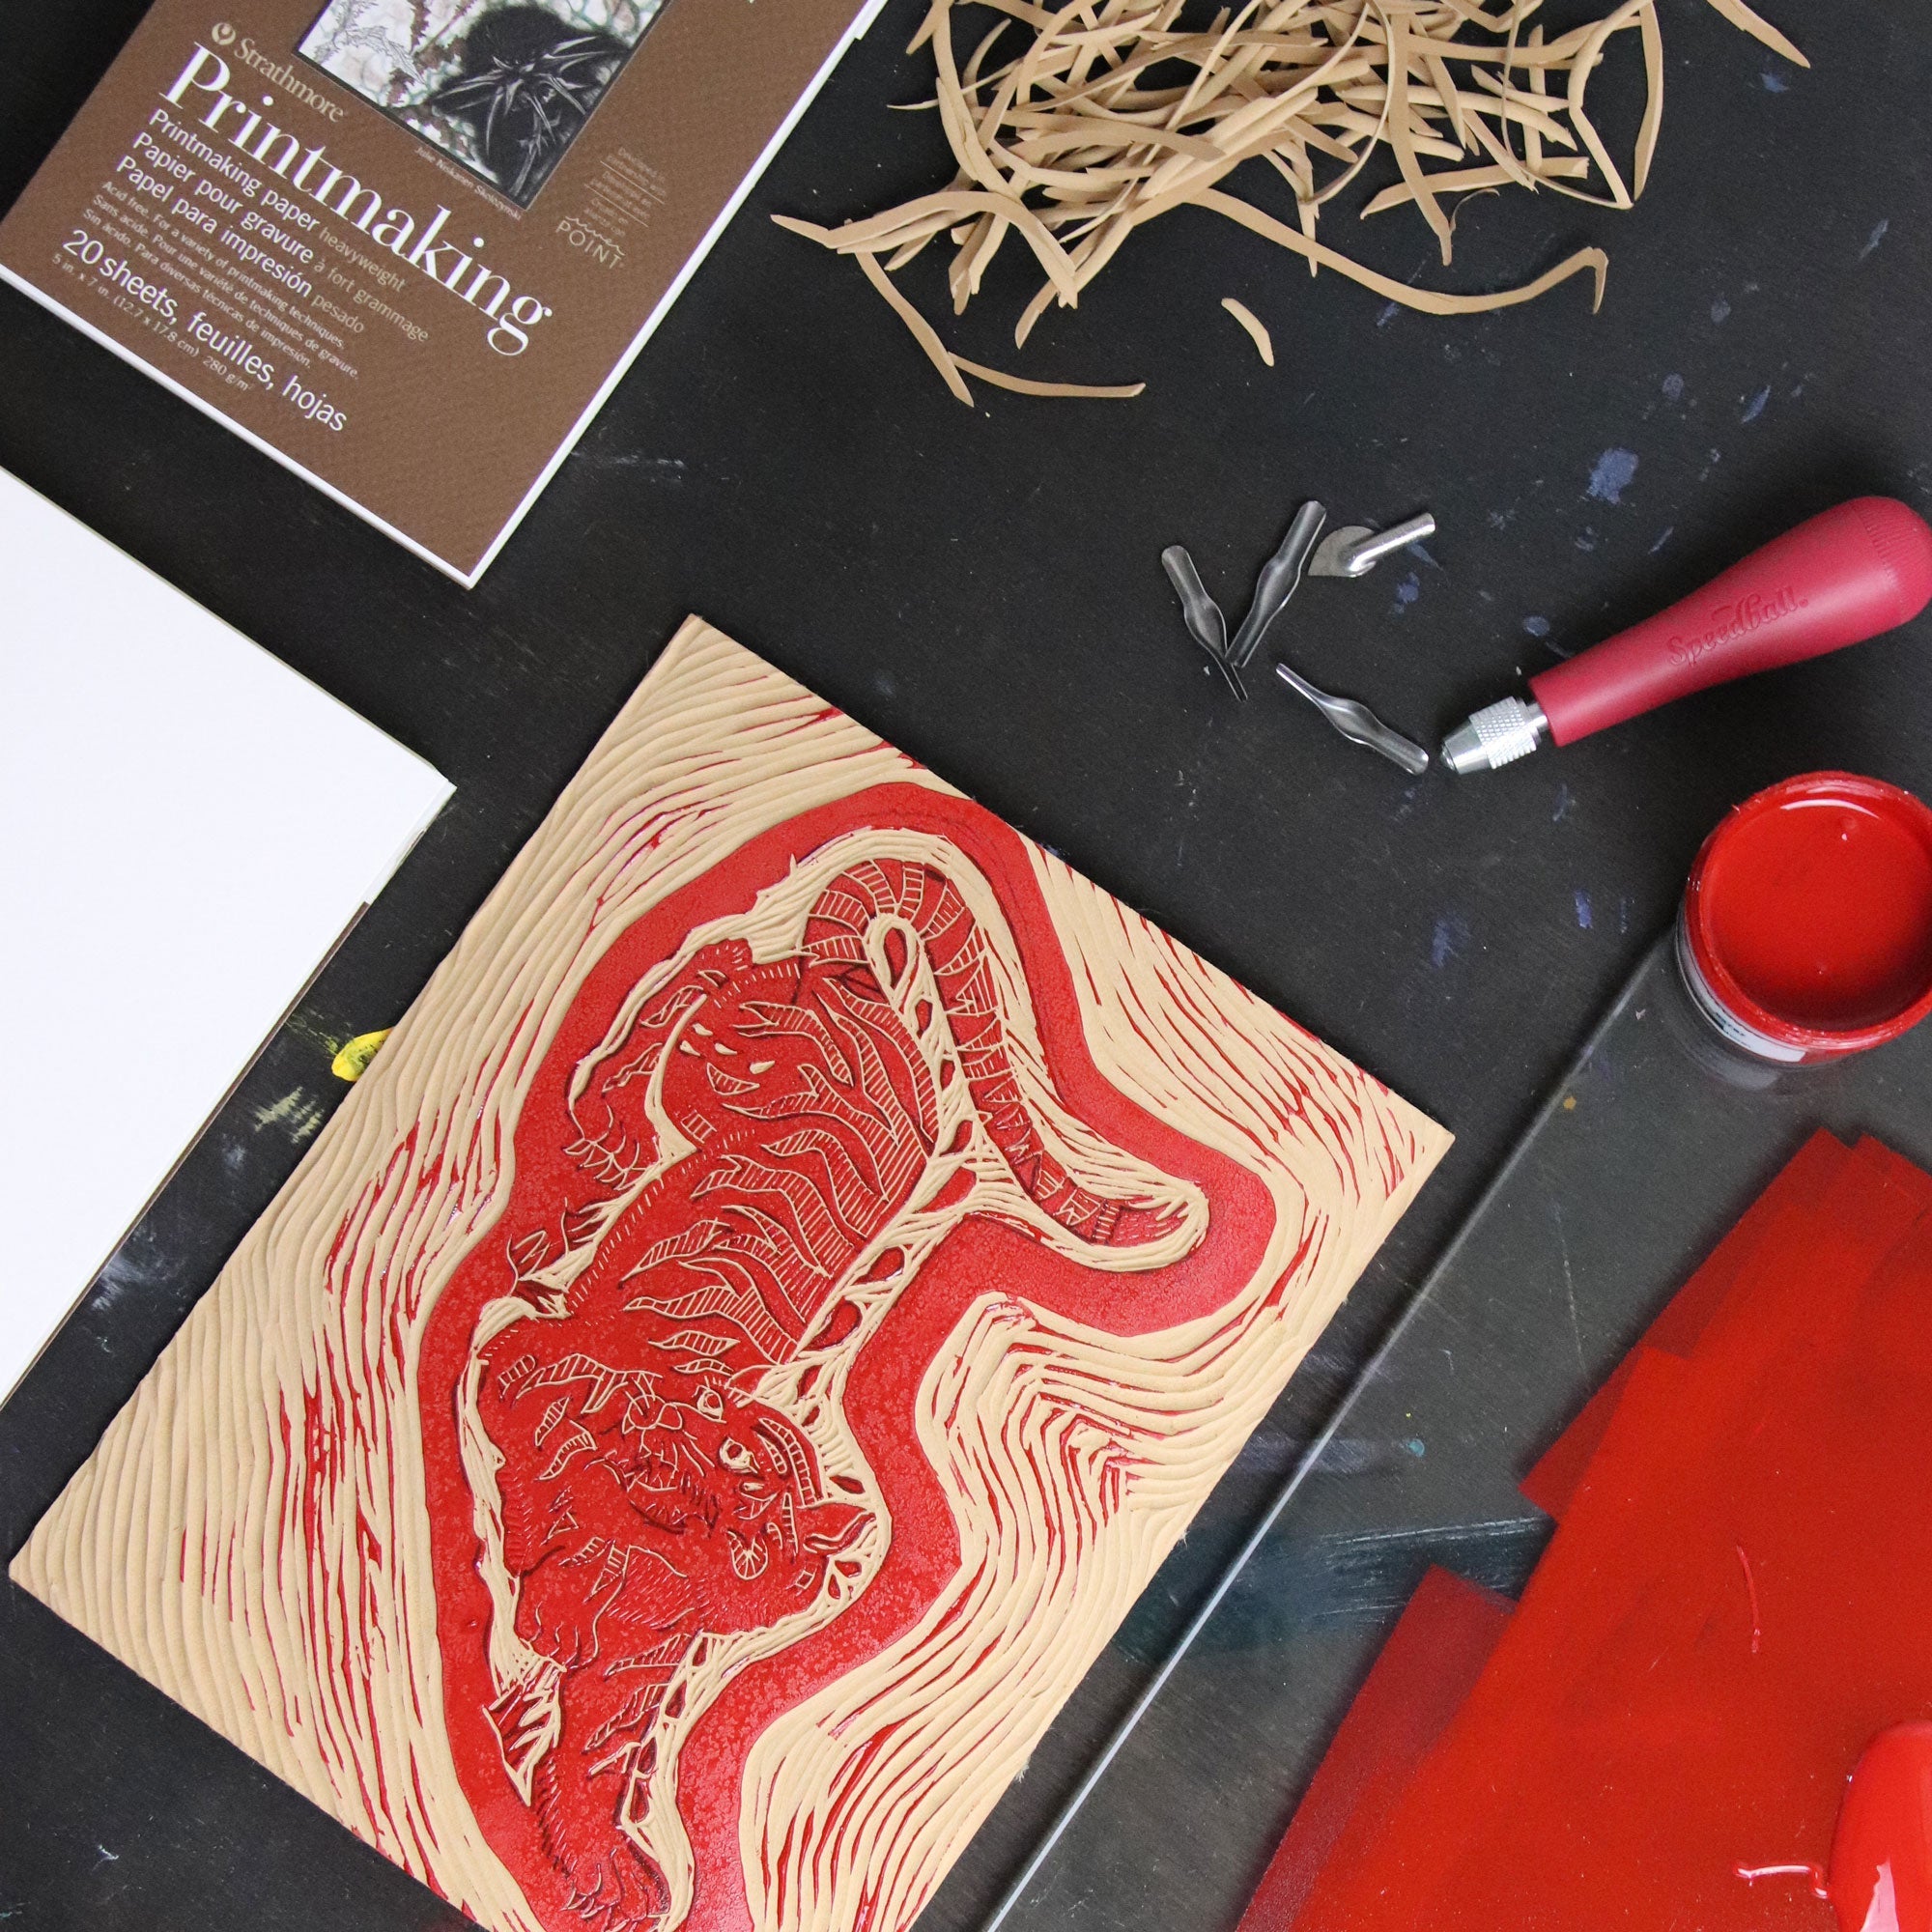 Printmaking Papers - Strathmore Artist Papers